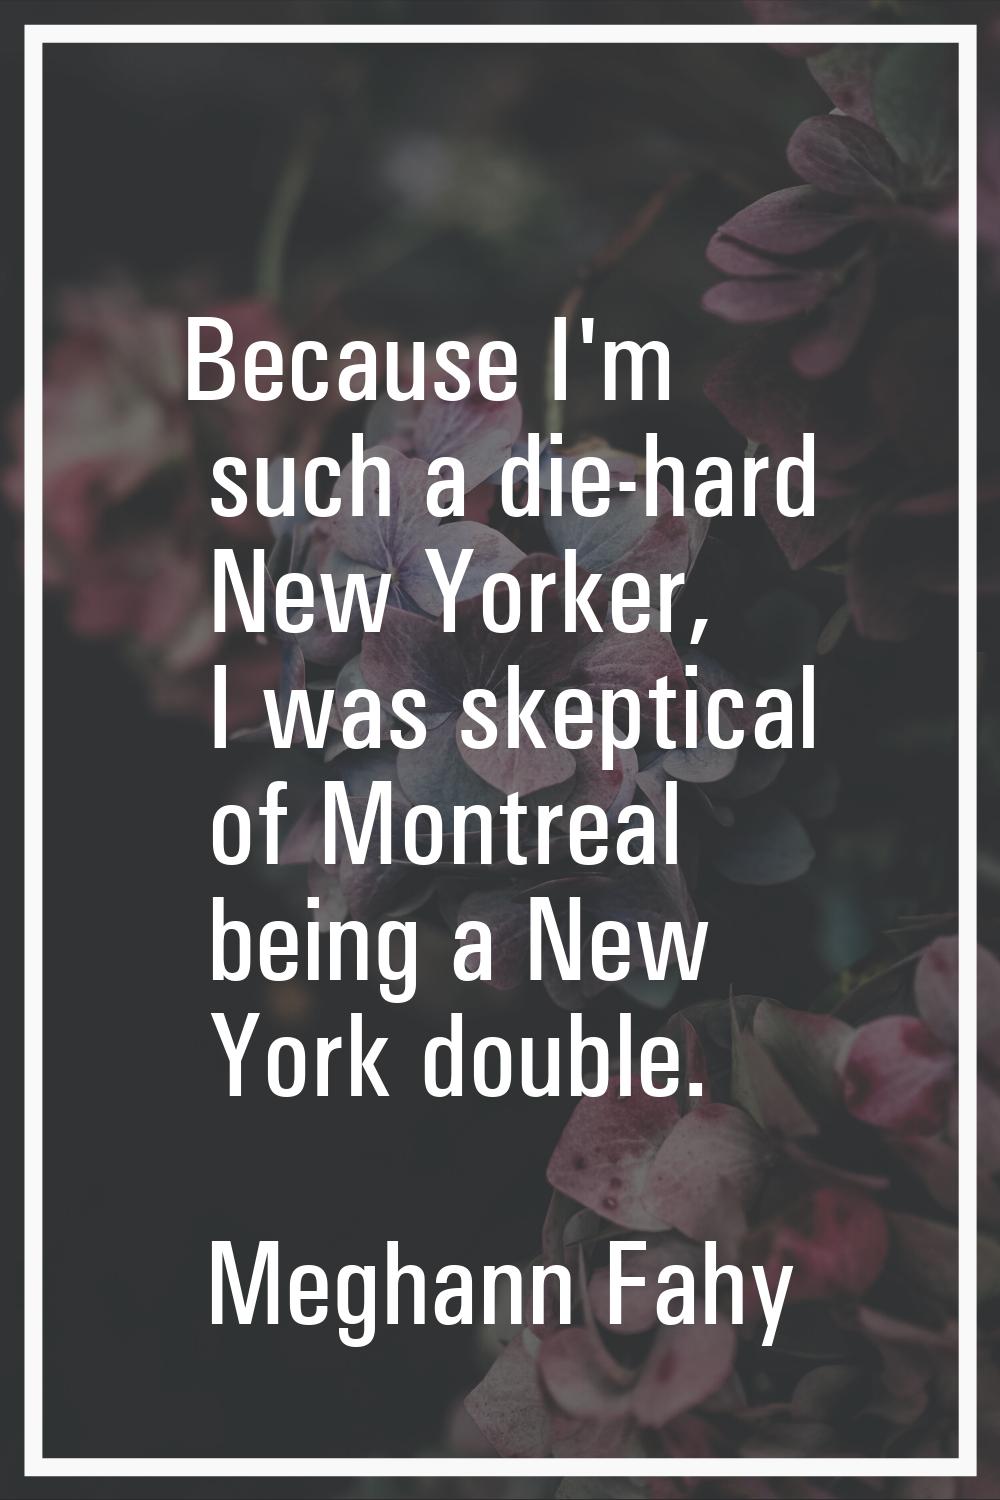 Because I'm such a die-hard New Yorker, I was skeptical of Montreal being a New York double.